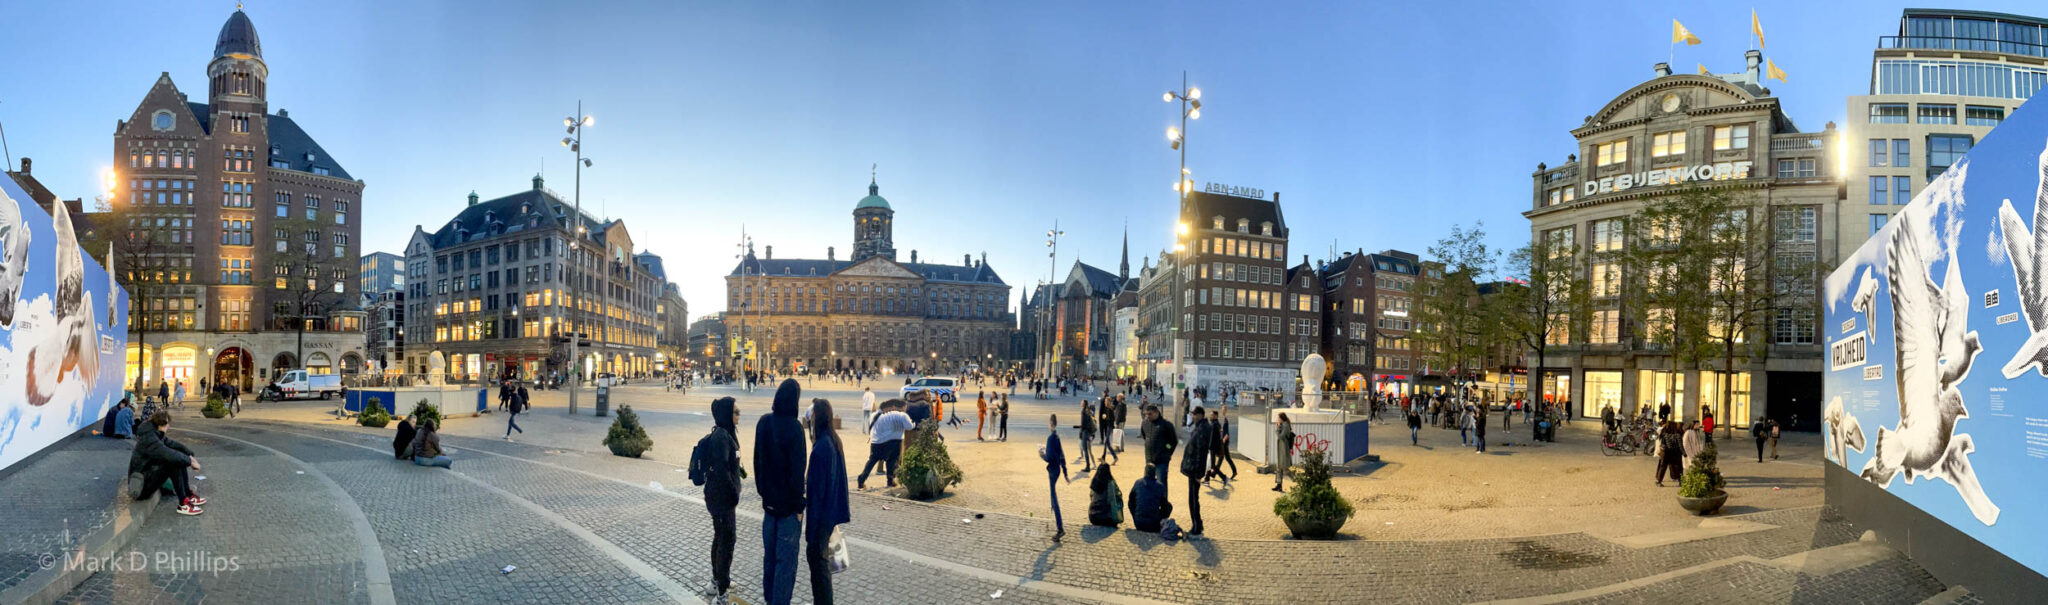 The Royal Palace of Amsterdam is situated on the west side of Dam Square in the centre of Amsterdam, opposite the War Memorial and next to the Nieuwe Kerk. ©Mark D Phillips